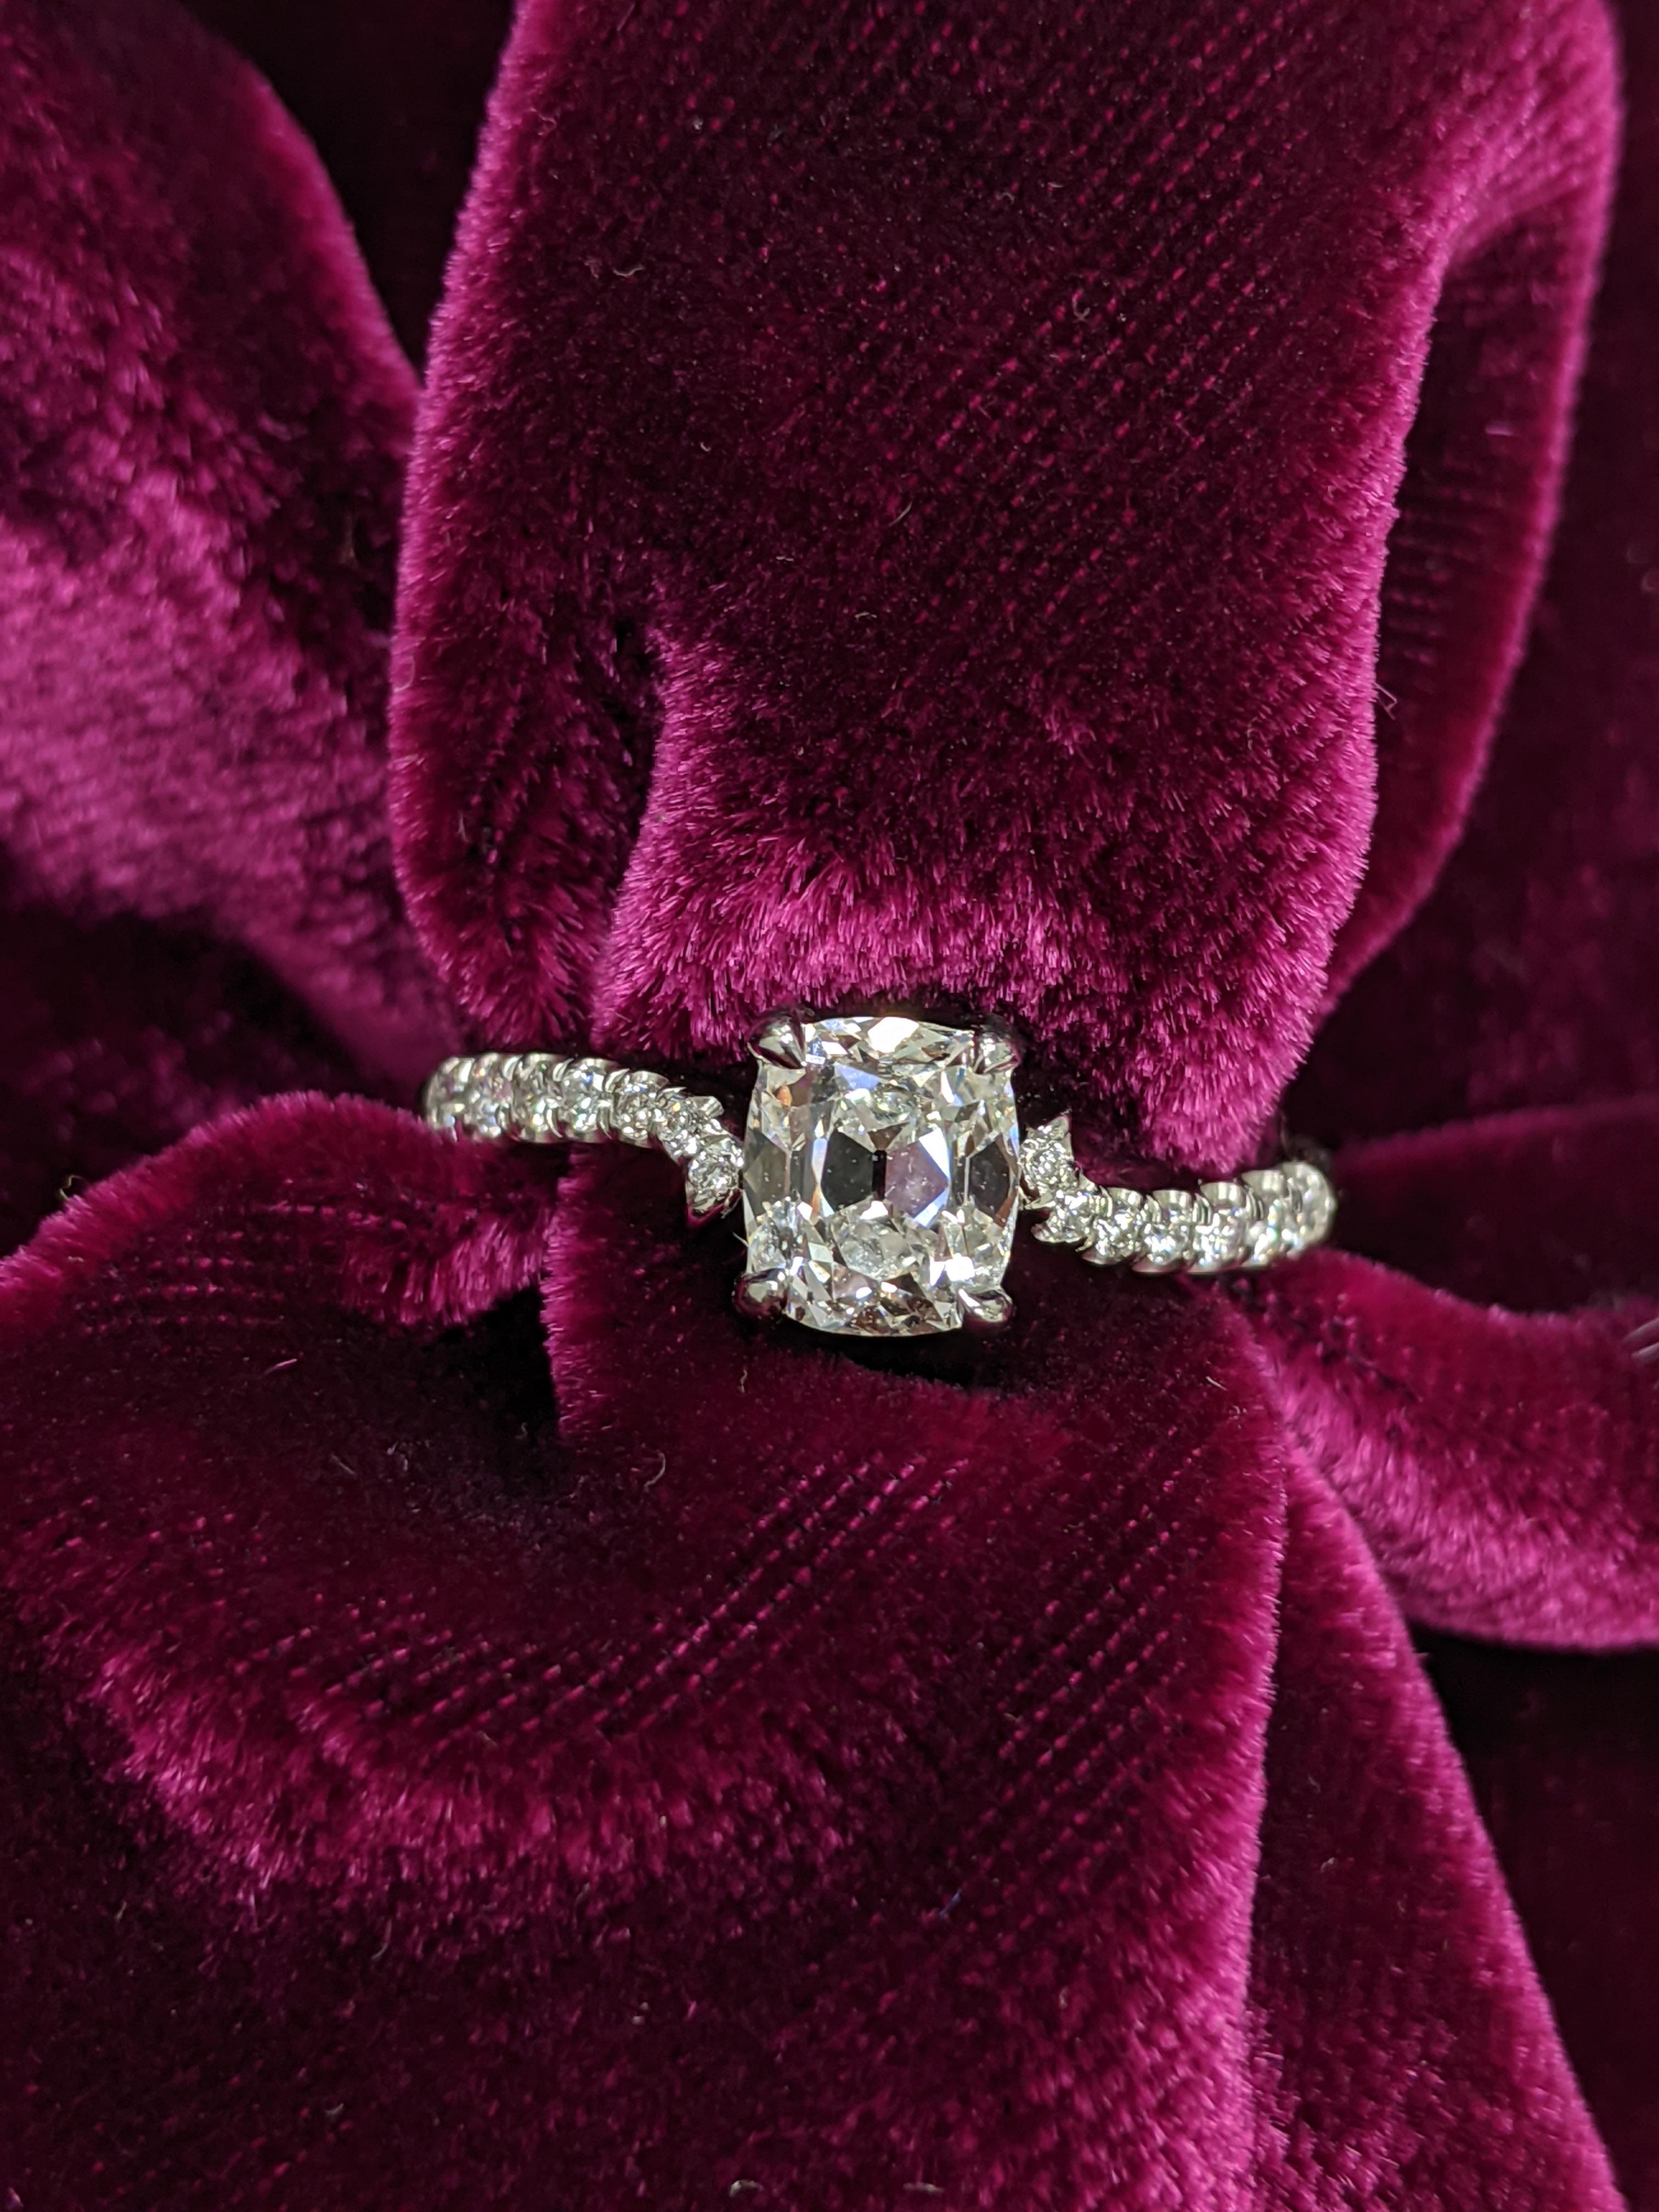 1.00 ct Cushion with F color and SI-1 clarity (GIA upon request) is mounted on a solitaire that is 